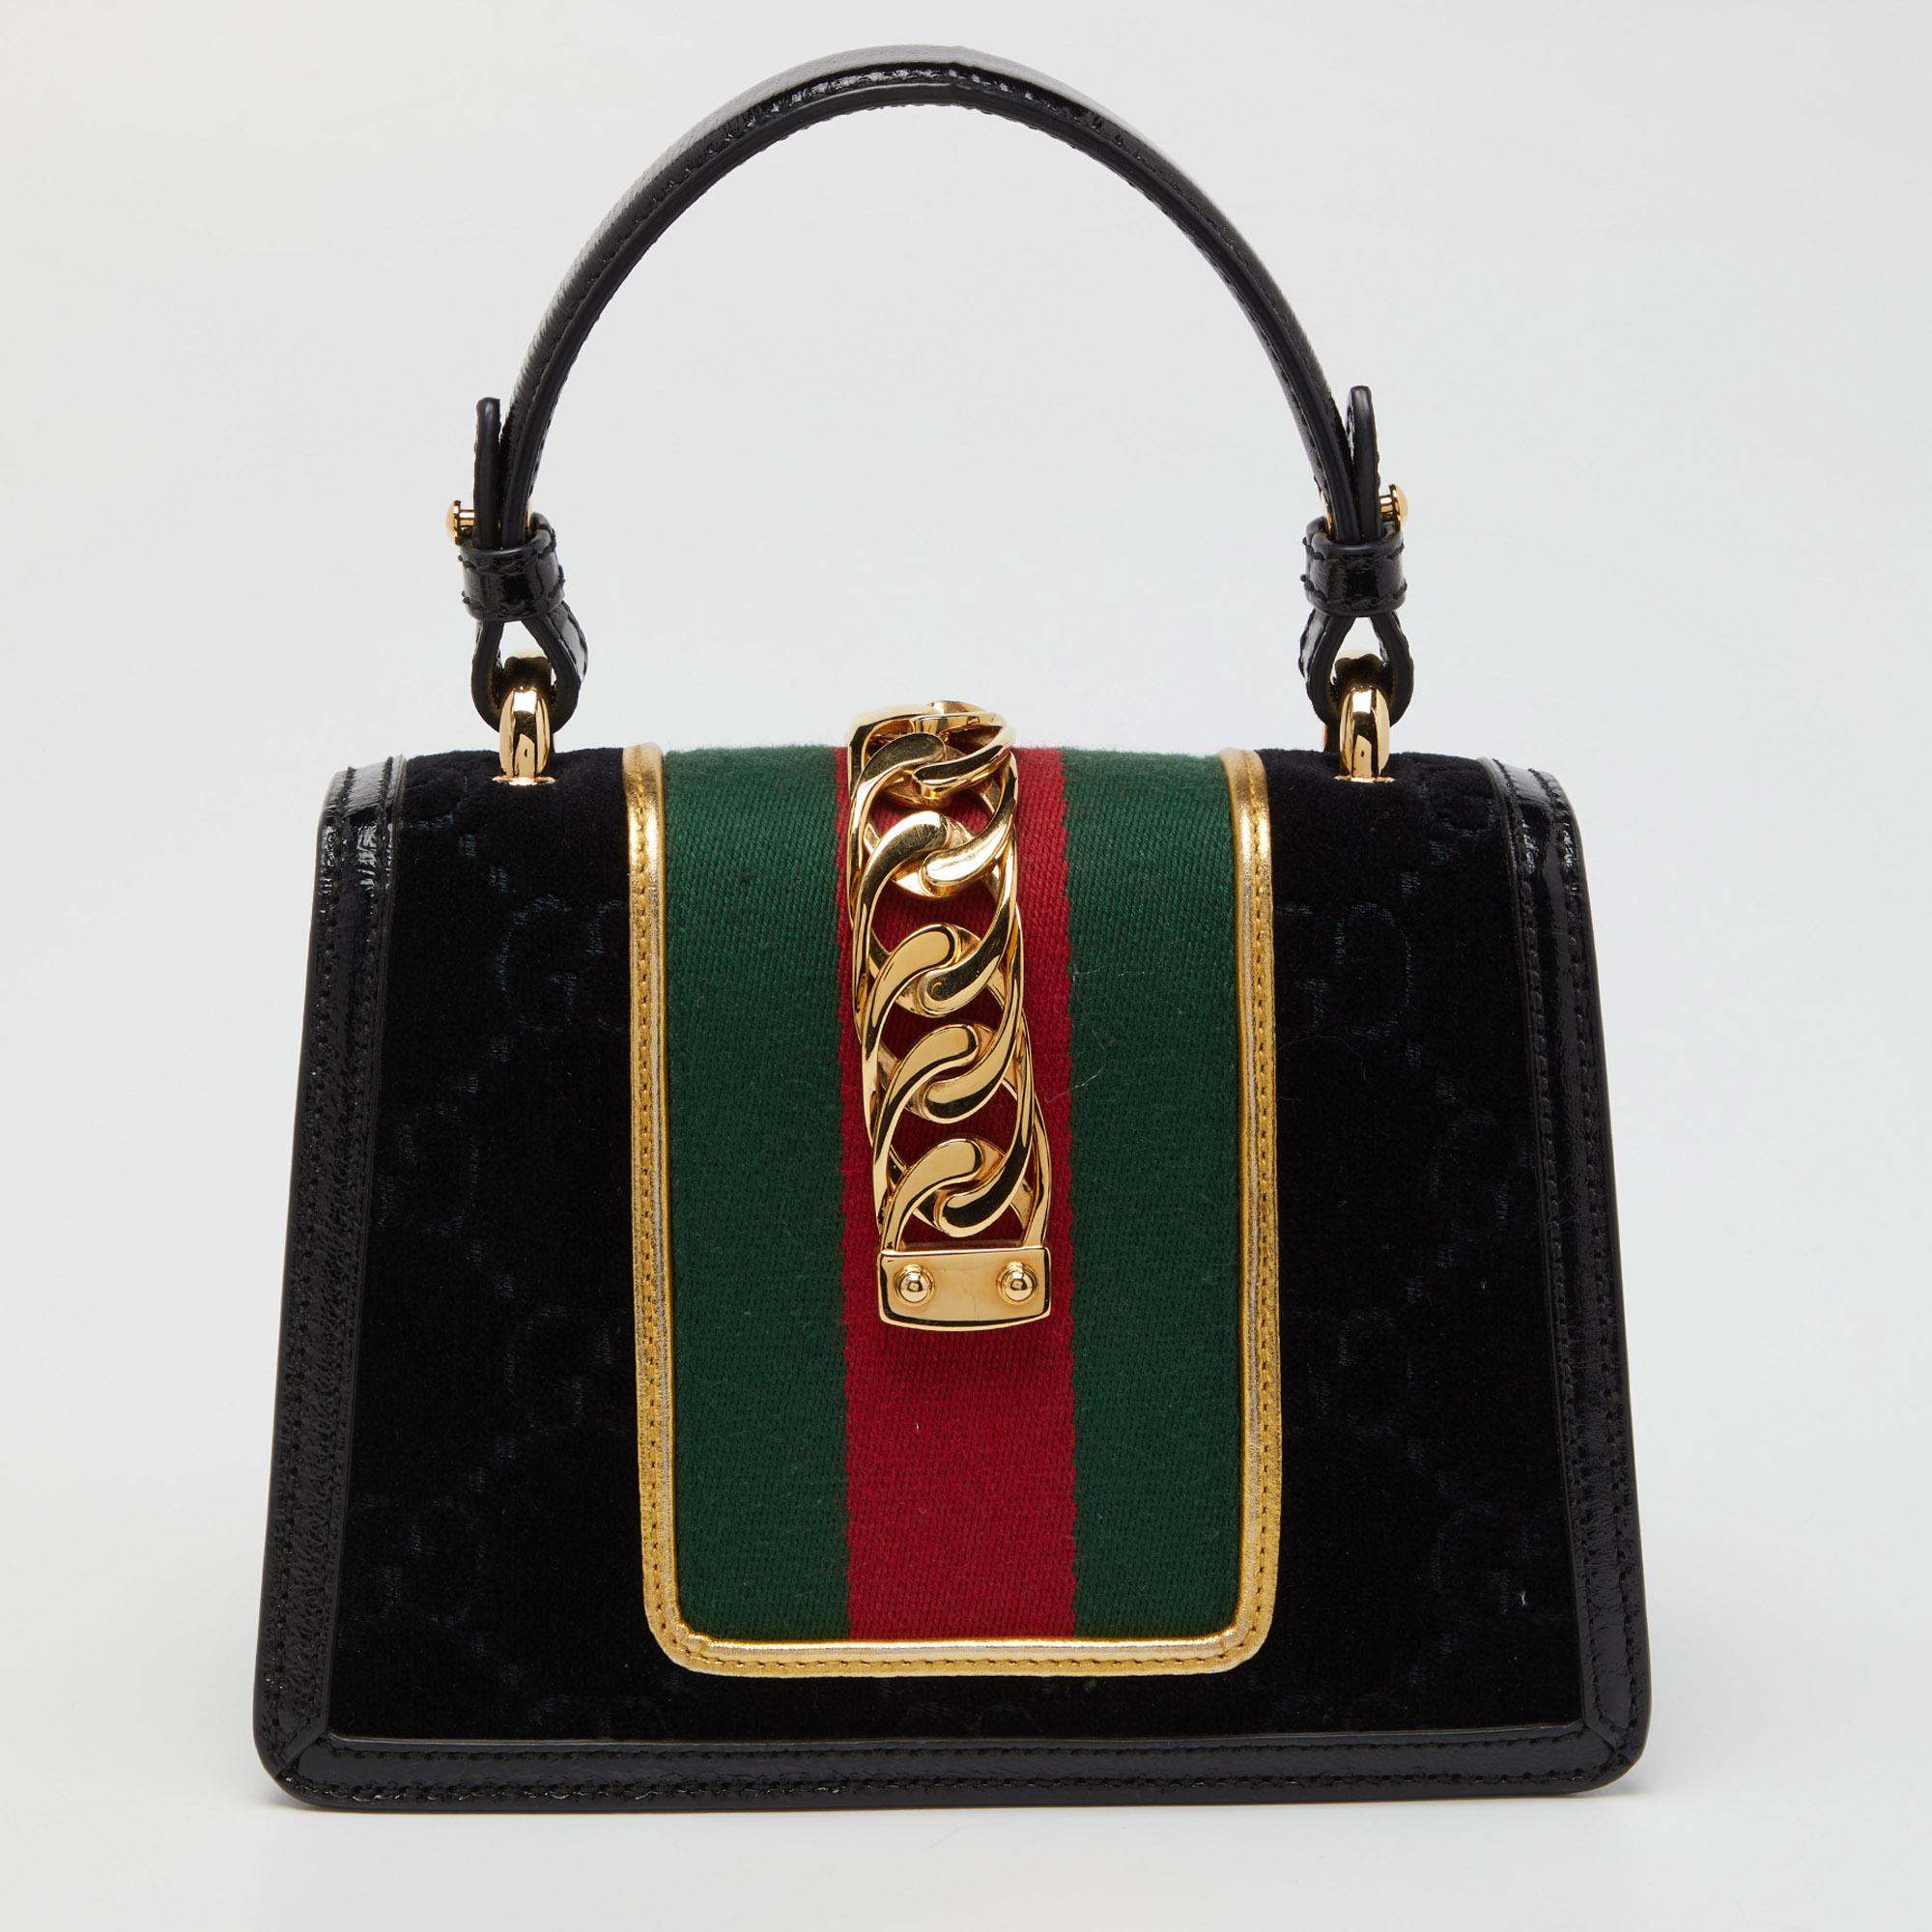 All the designs from Gucci, like this Sylvie bag, reflect a sense of innovation and tradition. Crafted from leather with the brand signature all over and an eye-catching flame design, it is admired for its alluring finish. The dual carrying options